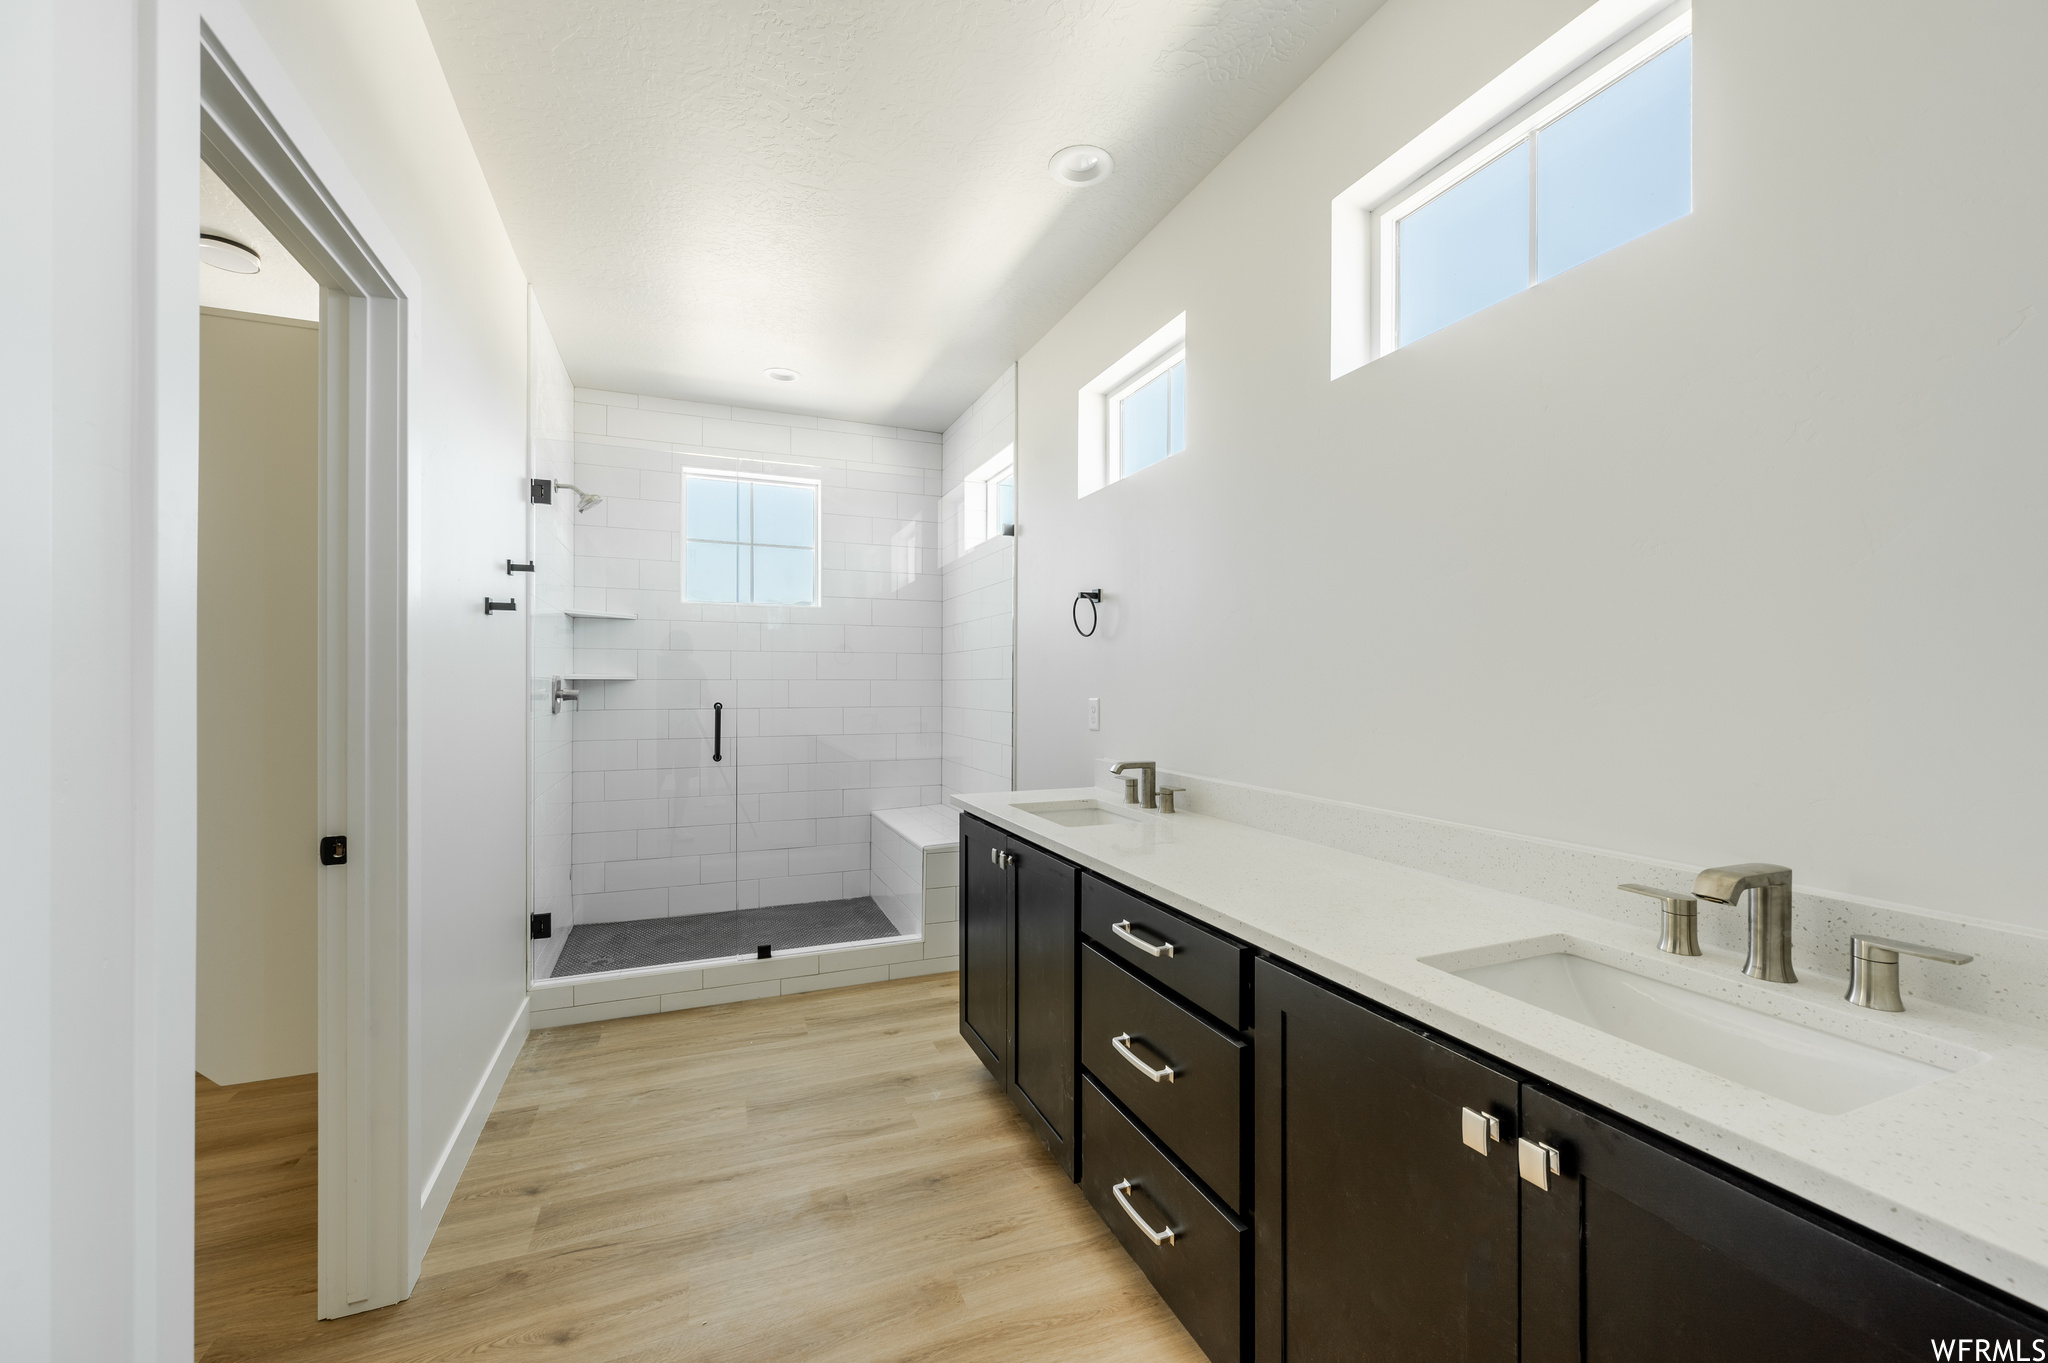 Owner's Bathroom with dual bowl vanity, a shower with shower door, and light, LVP floors